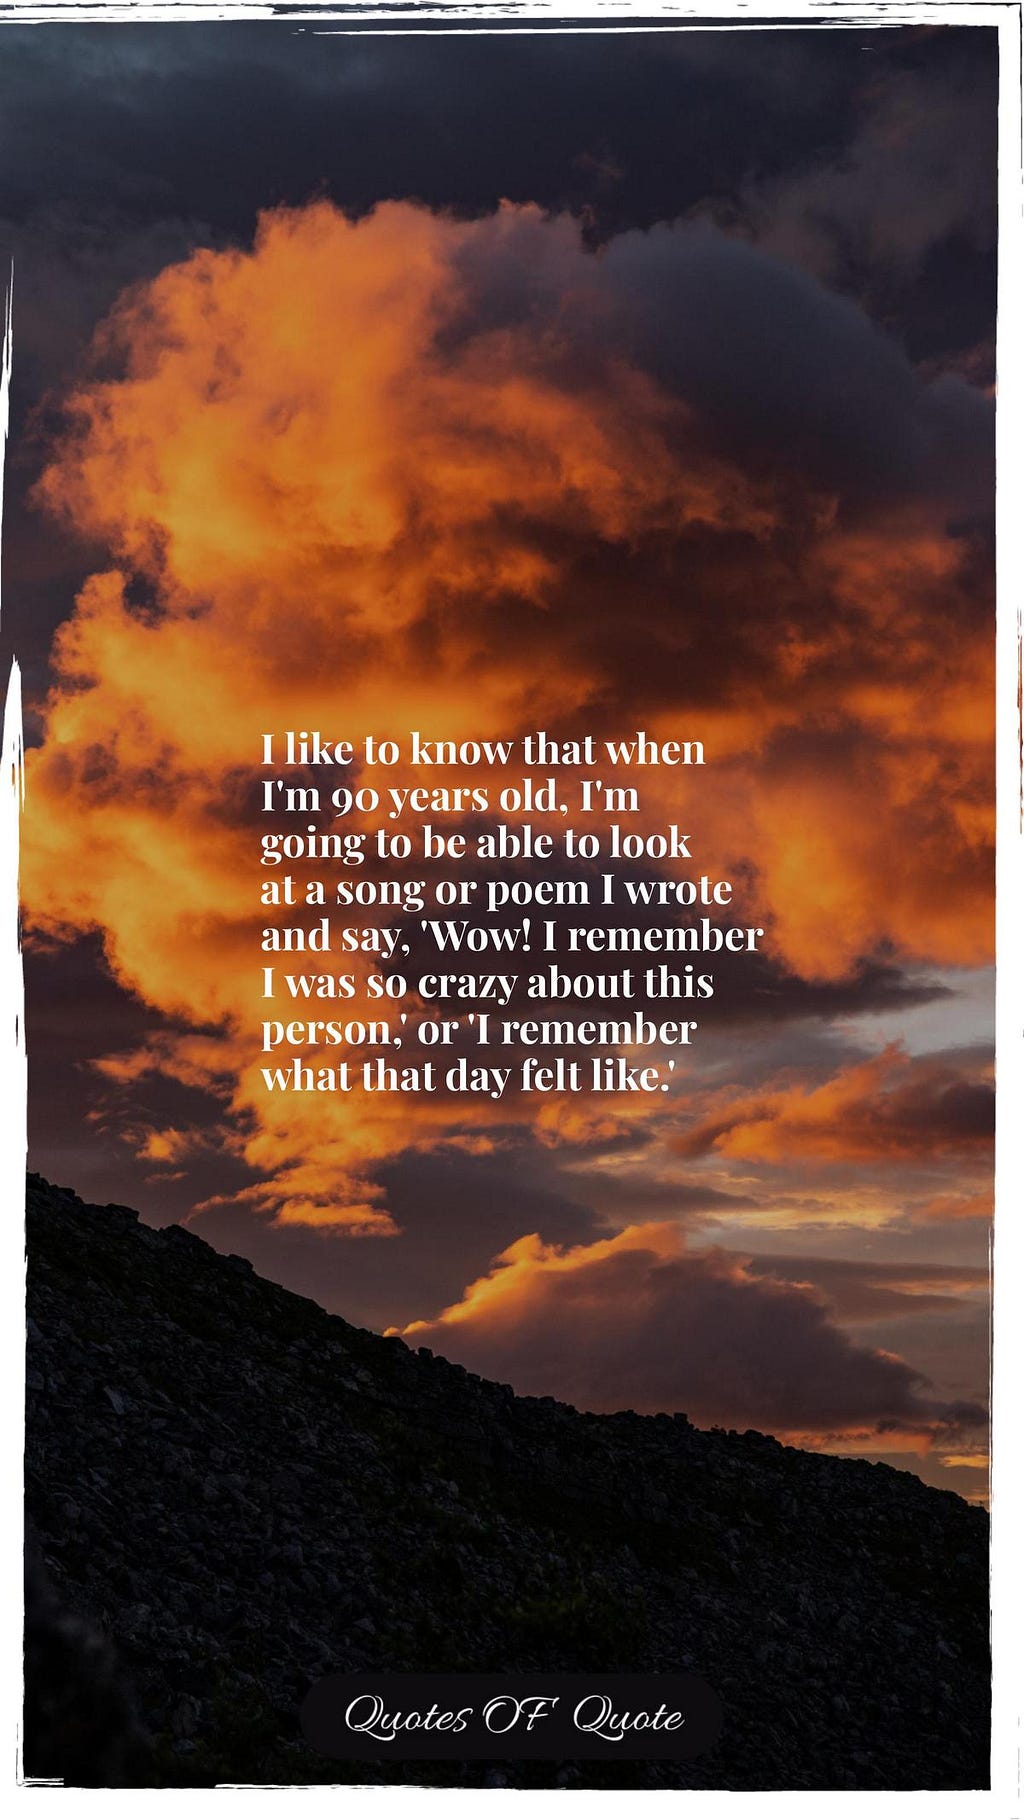 I like to know that when I'm 90 years old, I'm going to be able to look at a song or poem I wrote and say, 'Wow! I remember I was so crazy about this person,' or 'I remember what that day felt like.'